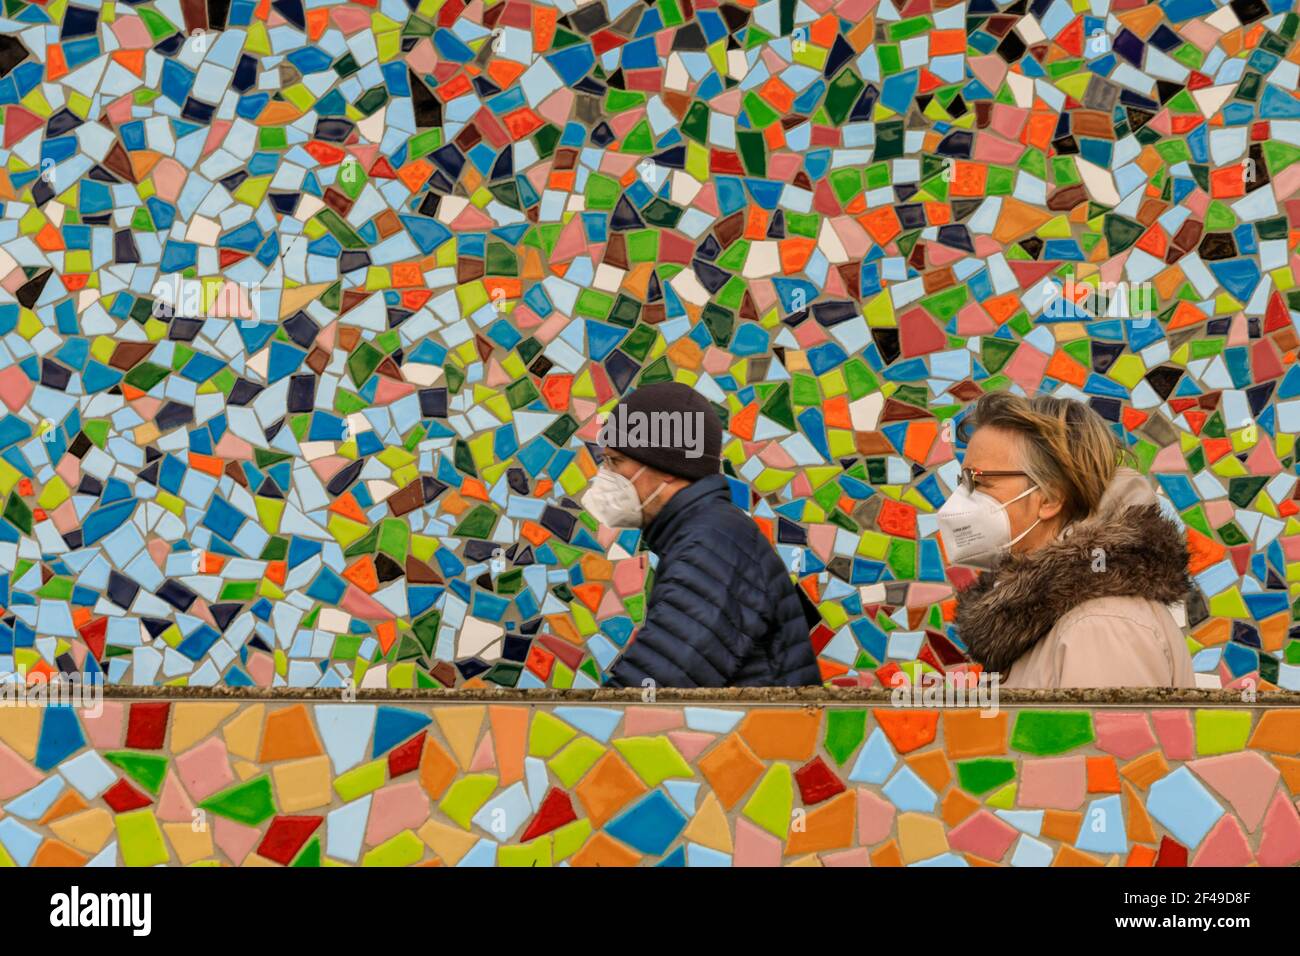 Dusseldorf, NRW, Germany, 19th Mar 2021. Two people in FFP2/KN95 face masks walk past the 'Rivertime' mosaic wall by Hermann-Josef Kuhna on the banks of the river Rhine in Dusseldorf, capital of NRW. Lockdown measures are likely to once again increase in Germany as the 7-day incidence rate creeps up towards the crucial cut-off point of 100/100k inhabitants. Whilst Dusseldorf fares relatively well at 63 today, Germany overall saw numbers rise to 95.6 Stock Photo